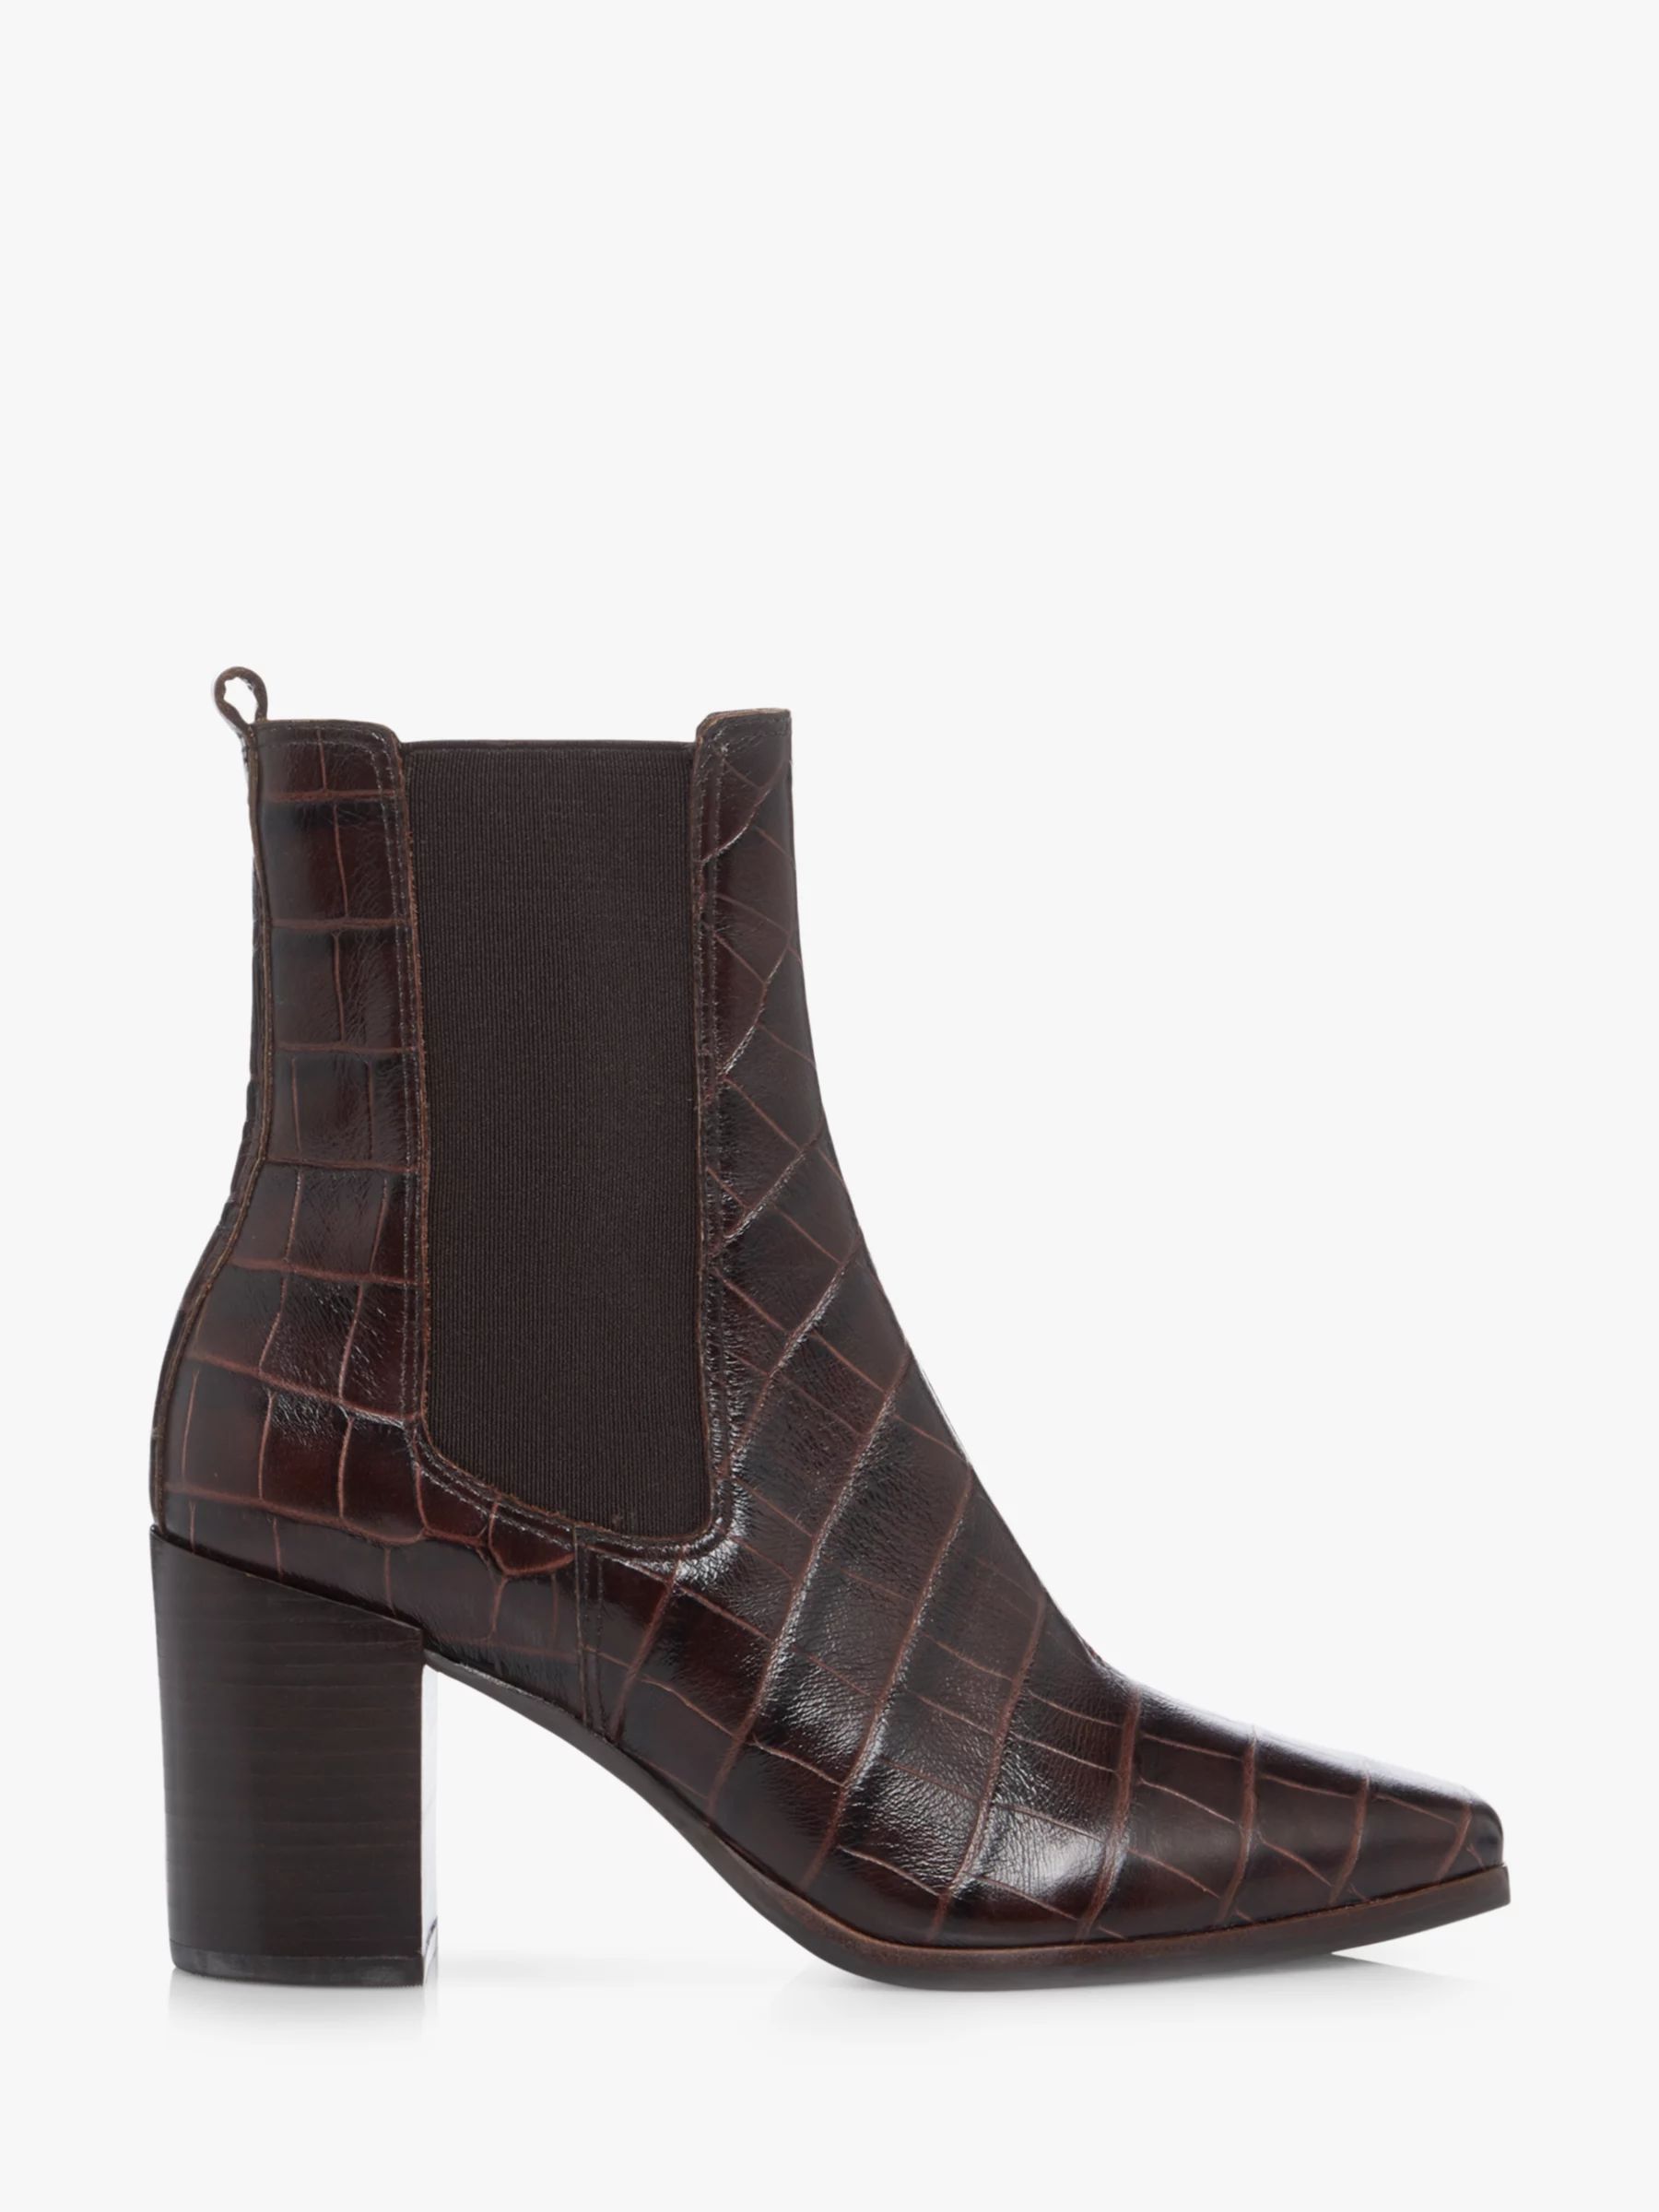 Dune Post Leather Croc Ankle Boots, Brown | John Lewis (UK)